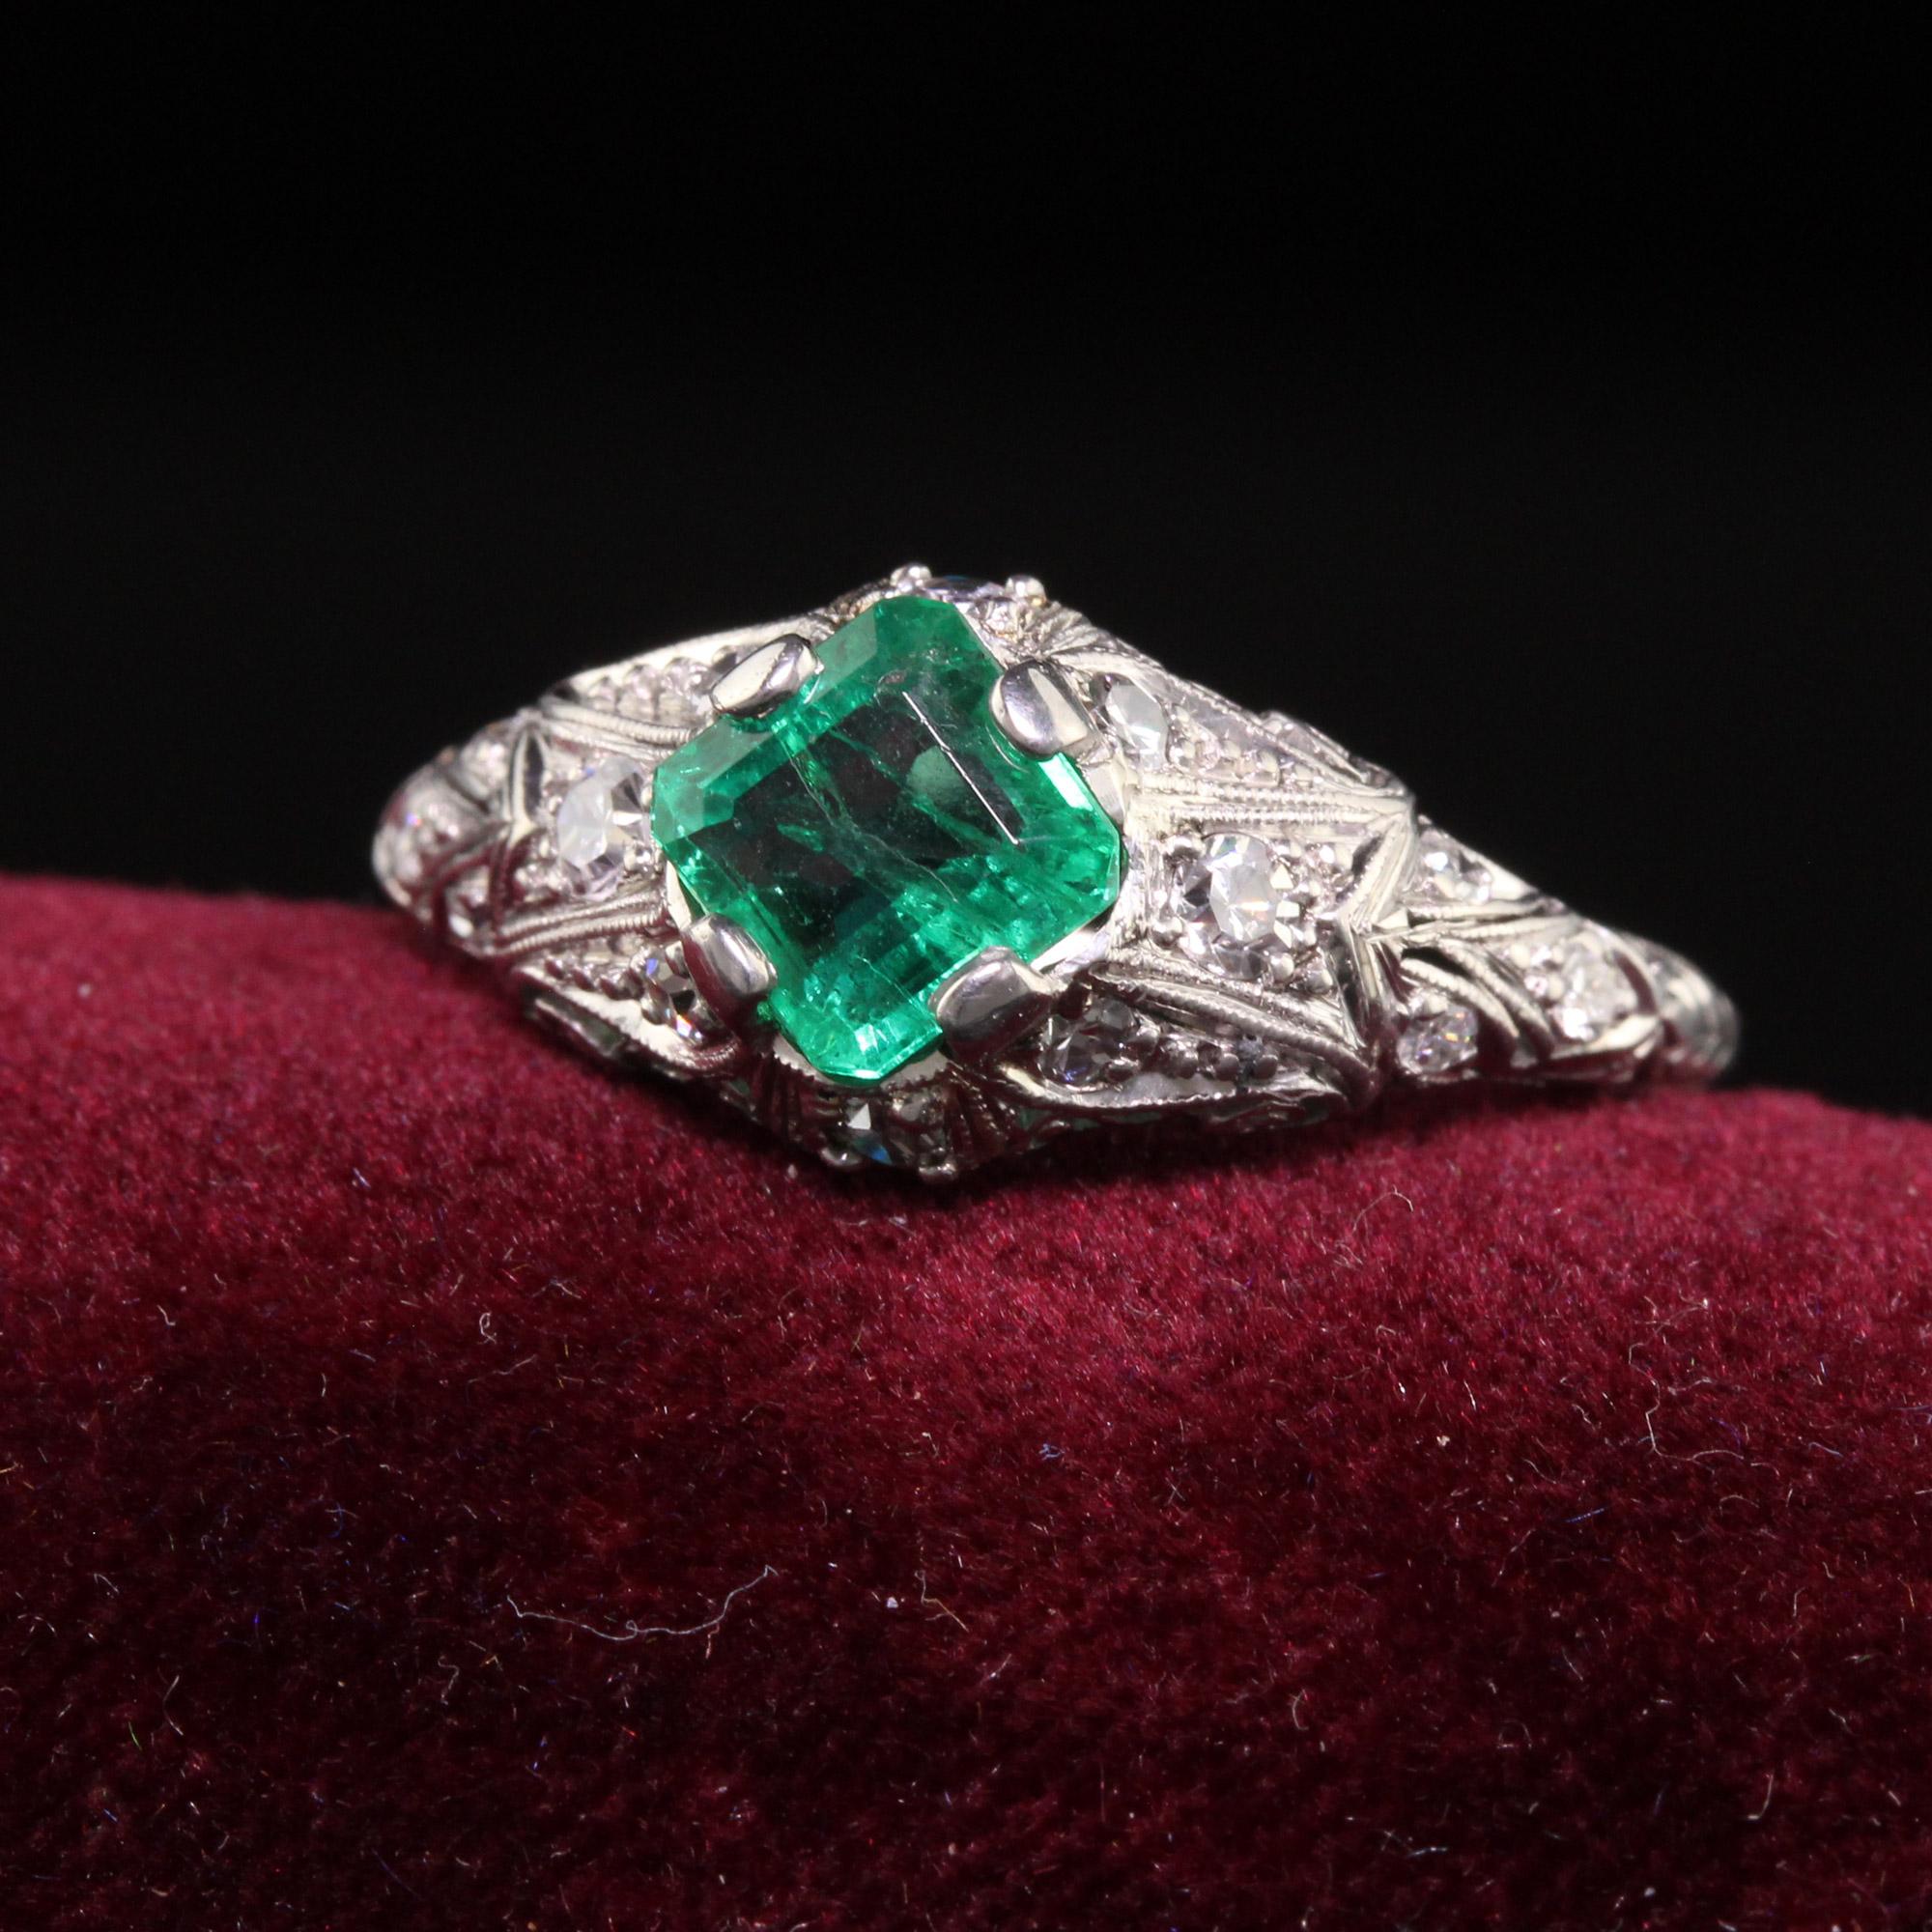 Beautiful Antique Art Deco Platinum Colombian Emerald Diamond Filigree Engagement Ring. This gorgeous engagement ring is crafted in platinum. The ring holds a genuine Colombian emerald with a GIA report in the center and has single cut diamonds set